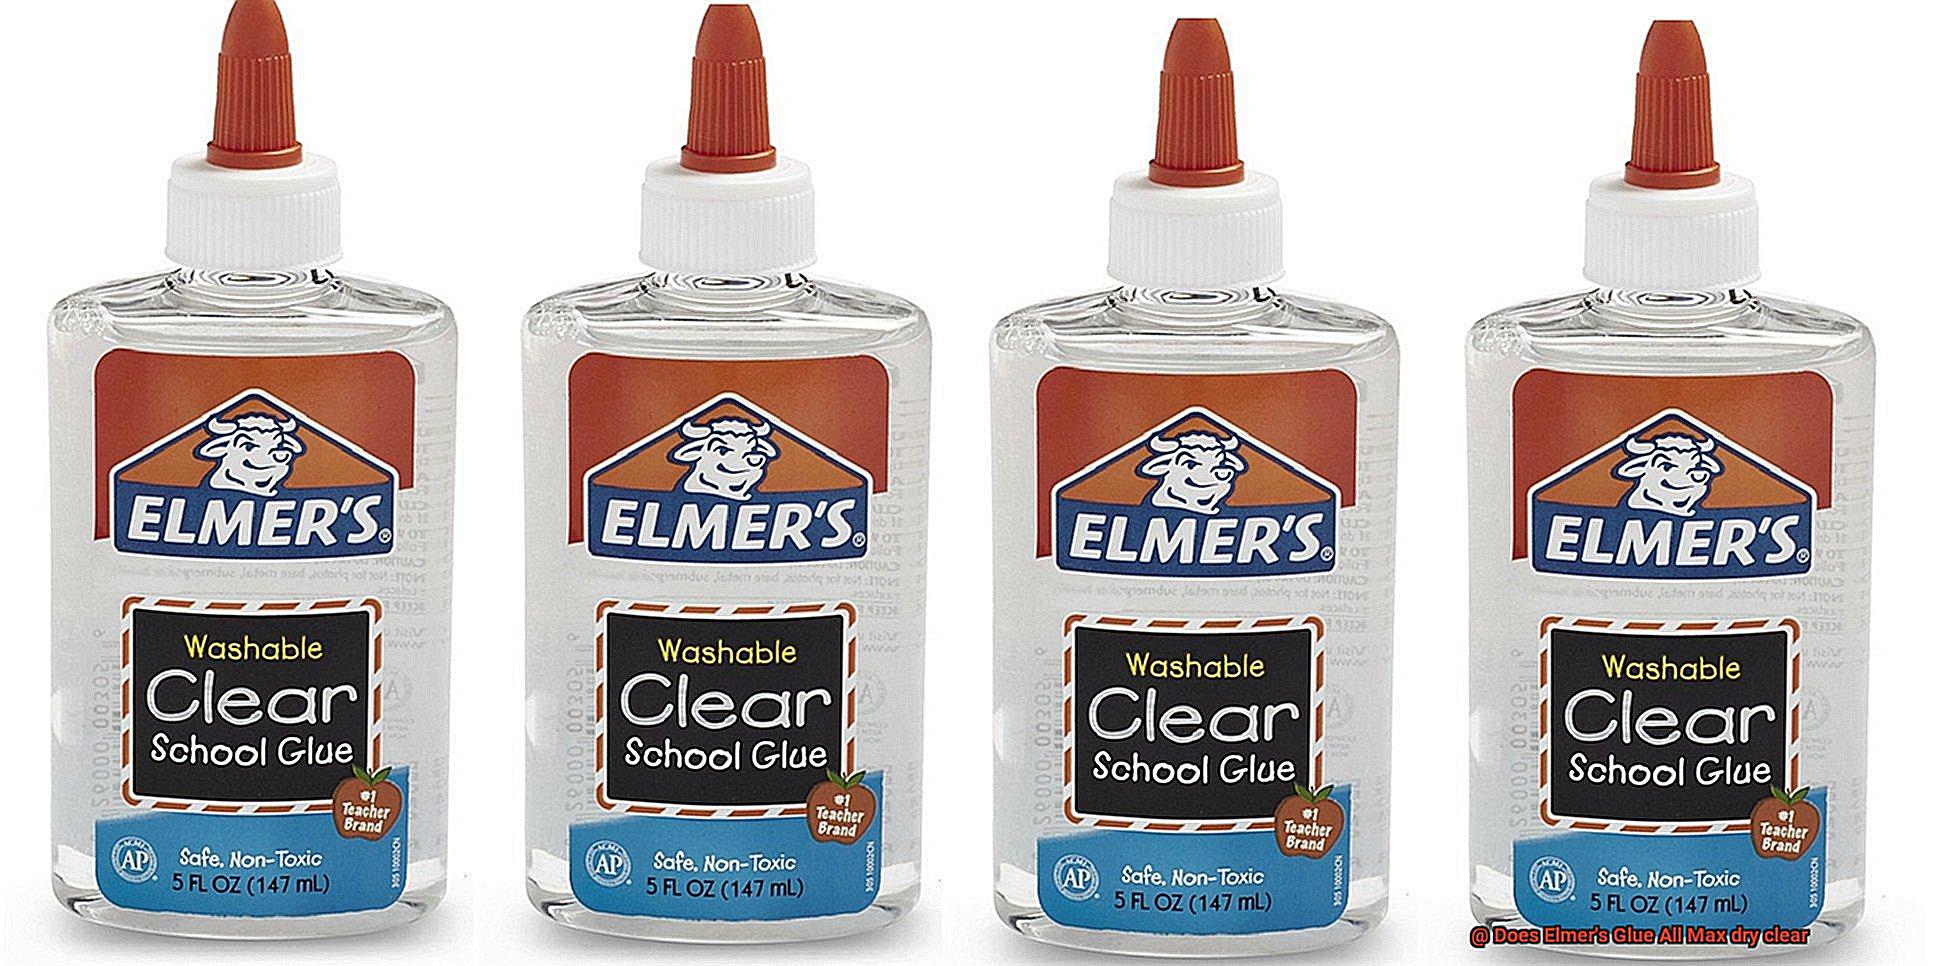 Does Elmer's Glue All Max dry clear-3